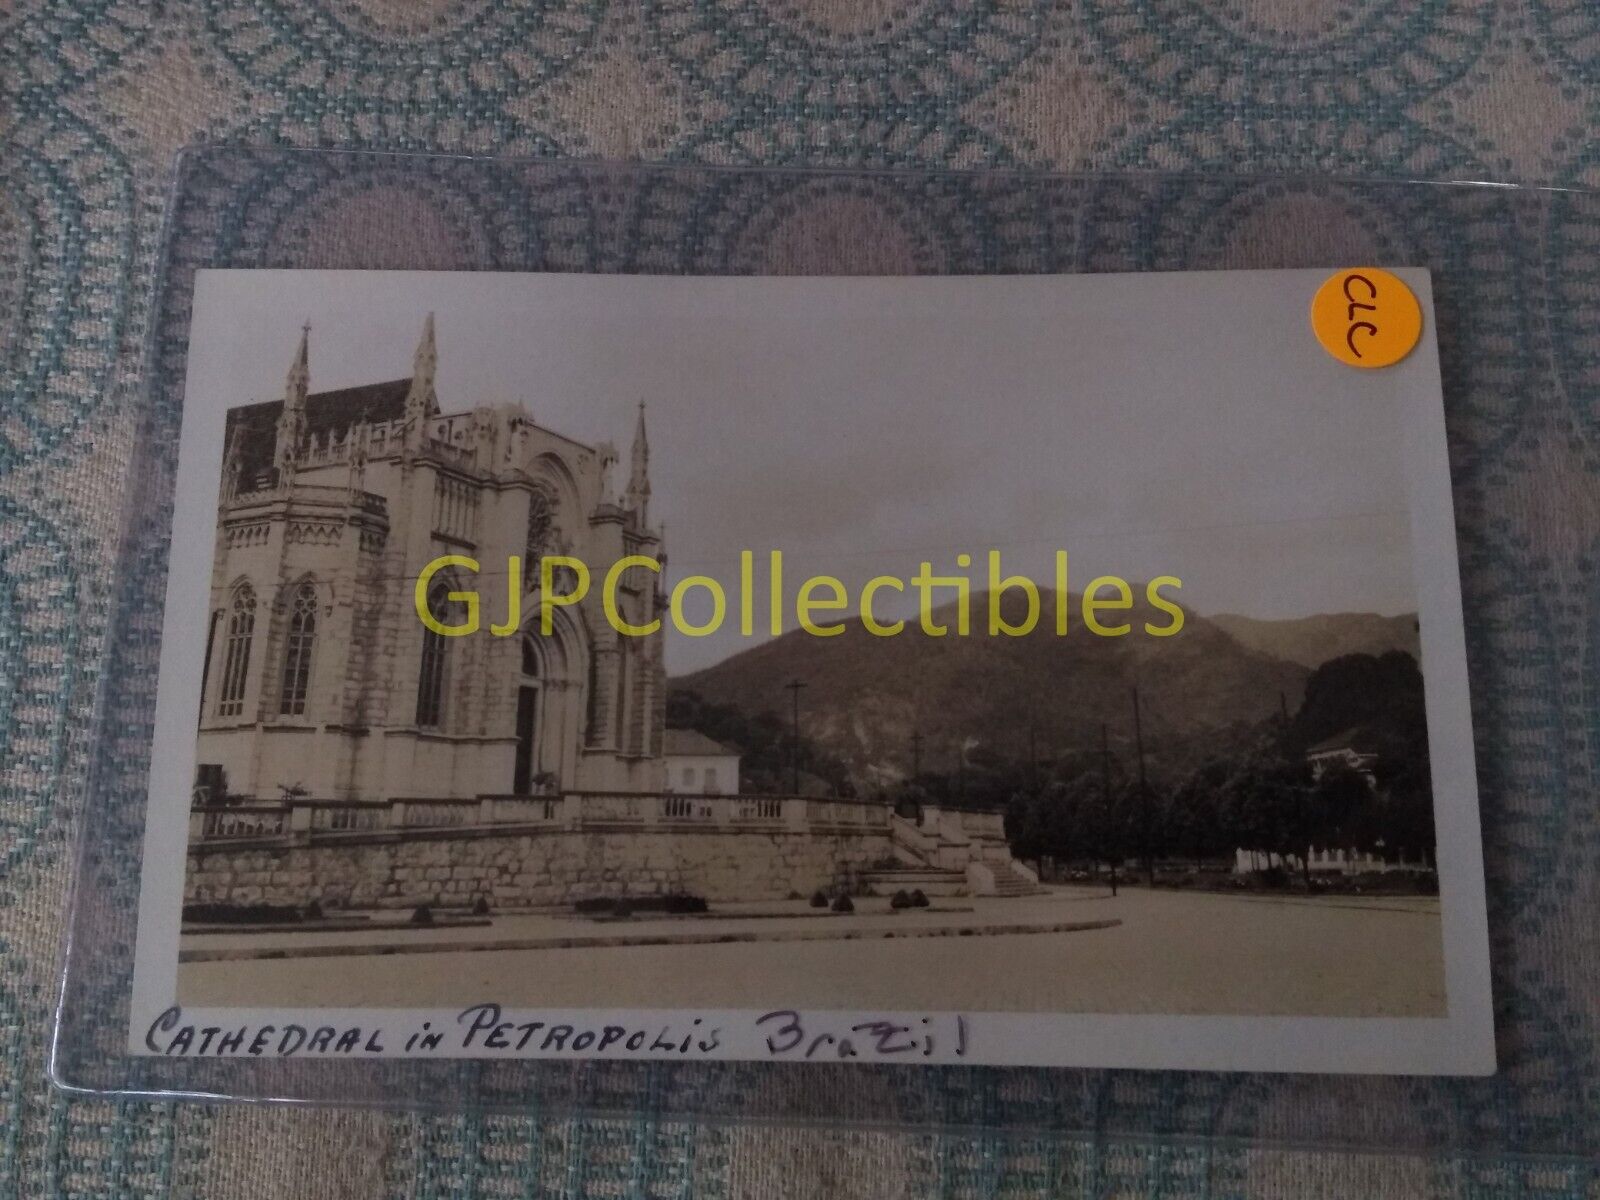 CLC VINTAGE PHOTOGRAPH Spencer Lionel Adams CATHEDRAL IN PETROPOLIS BRAZIL